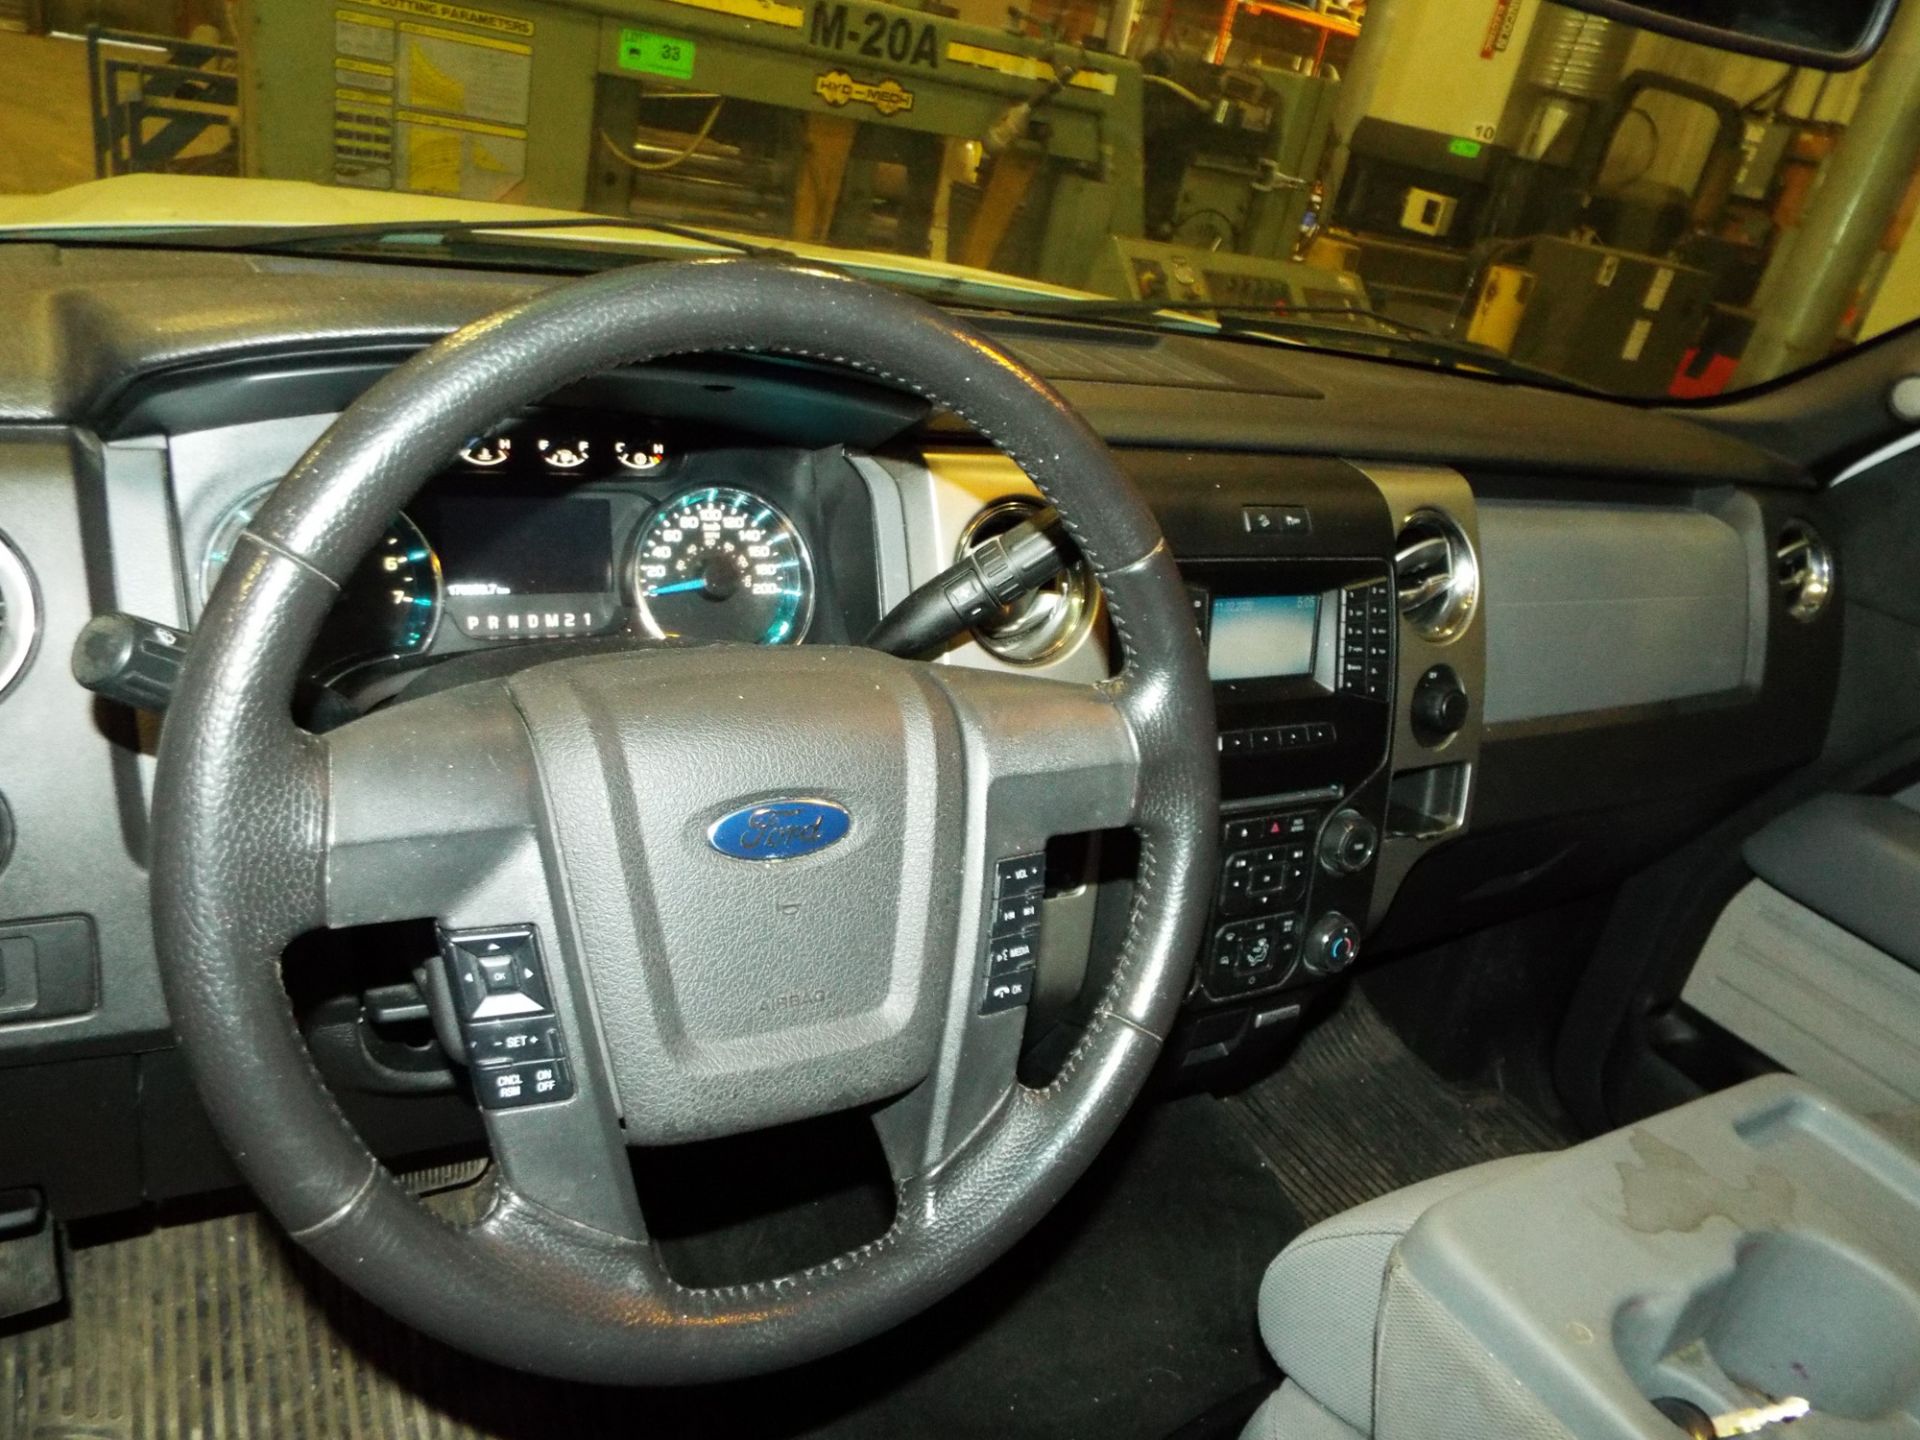 FORD (2014) F150 XLT PICKUP TRUCK WITH 5.0L 8 CYLINDER ENGINE, AUTOMATIC TRANSMISSION, 4X4, A/C, - Image 5 of 10